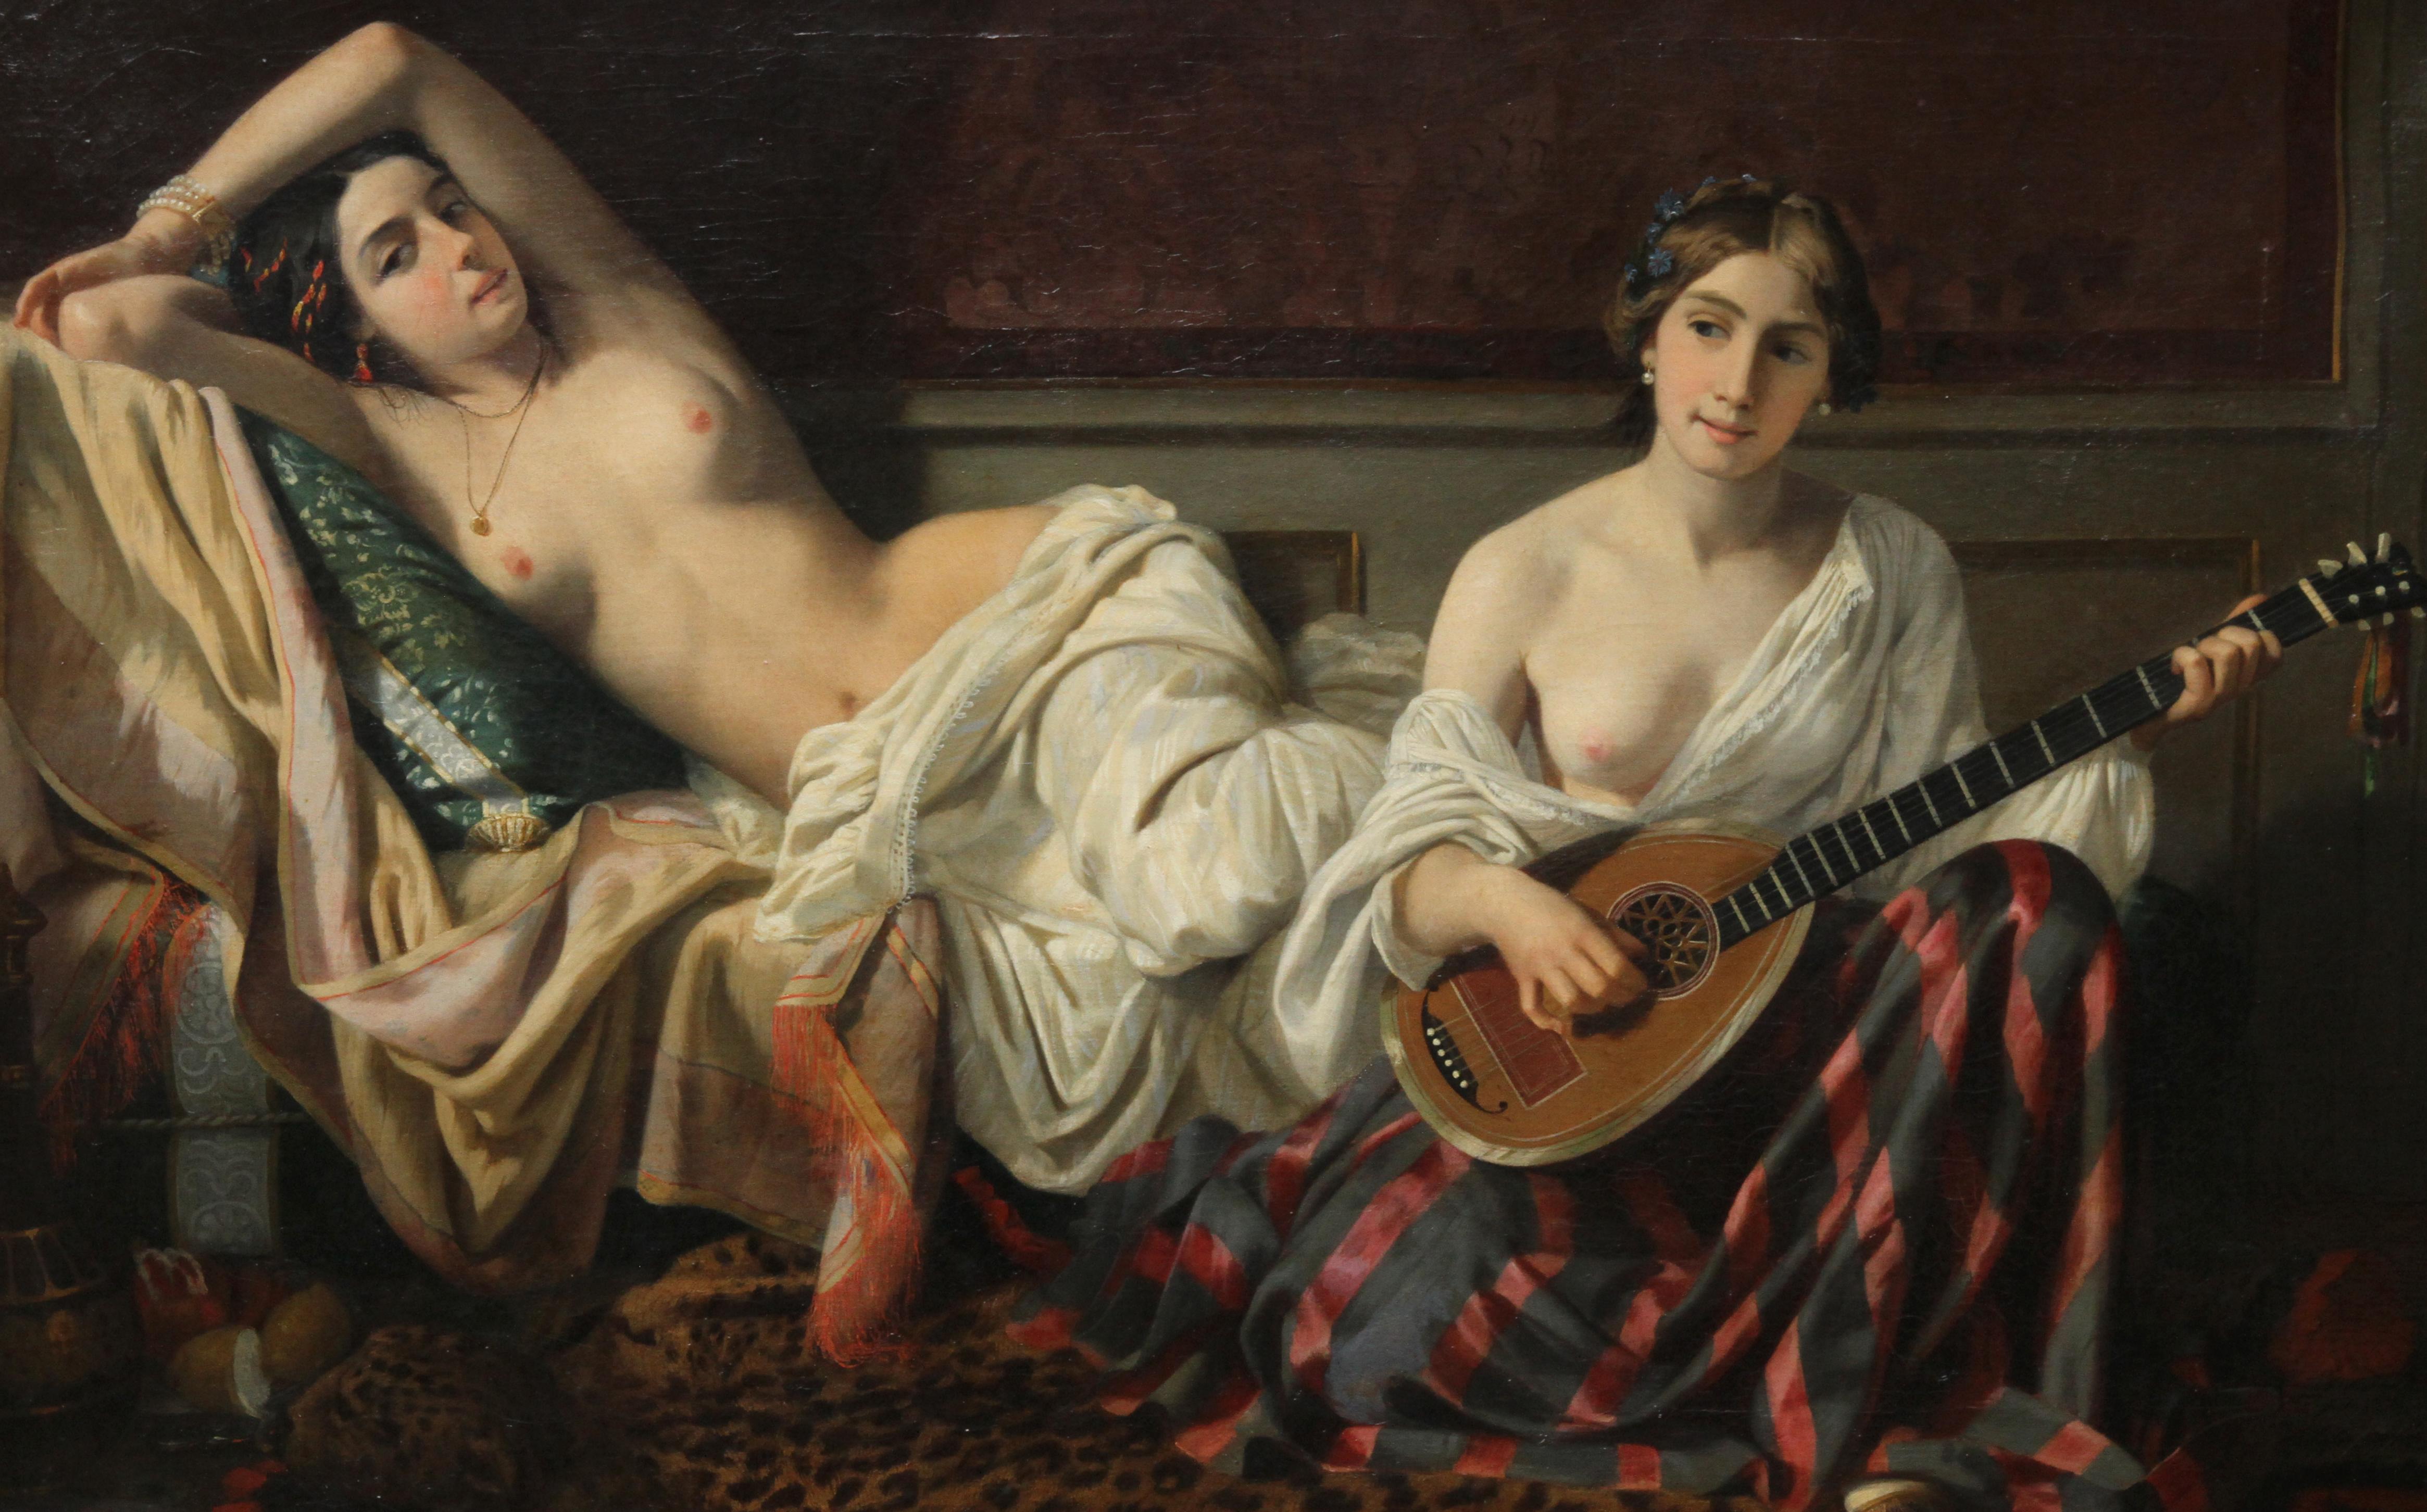 Serenade in the Harem - French 19th Century Orientalist art nude oil painting - Realist Painting by Joseph Caraud